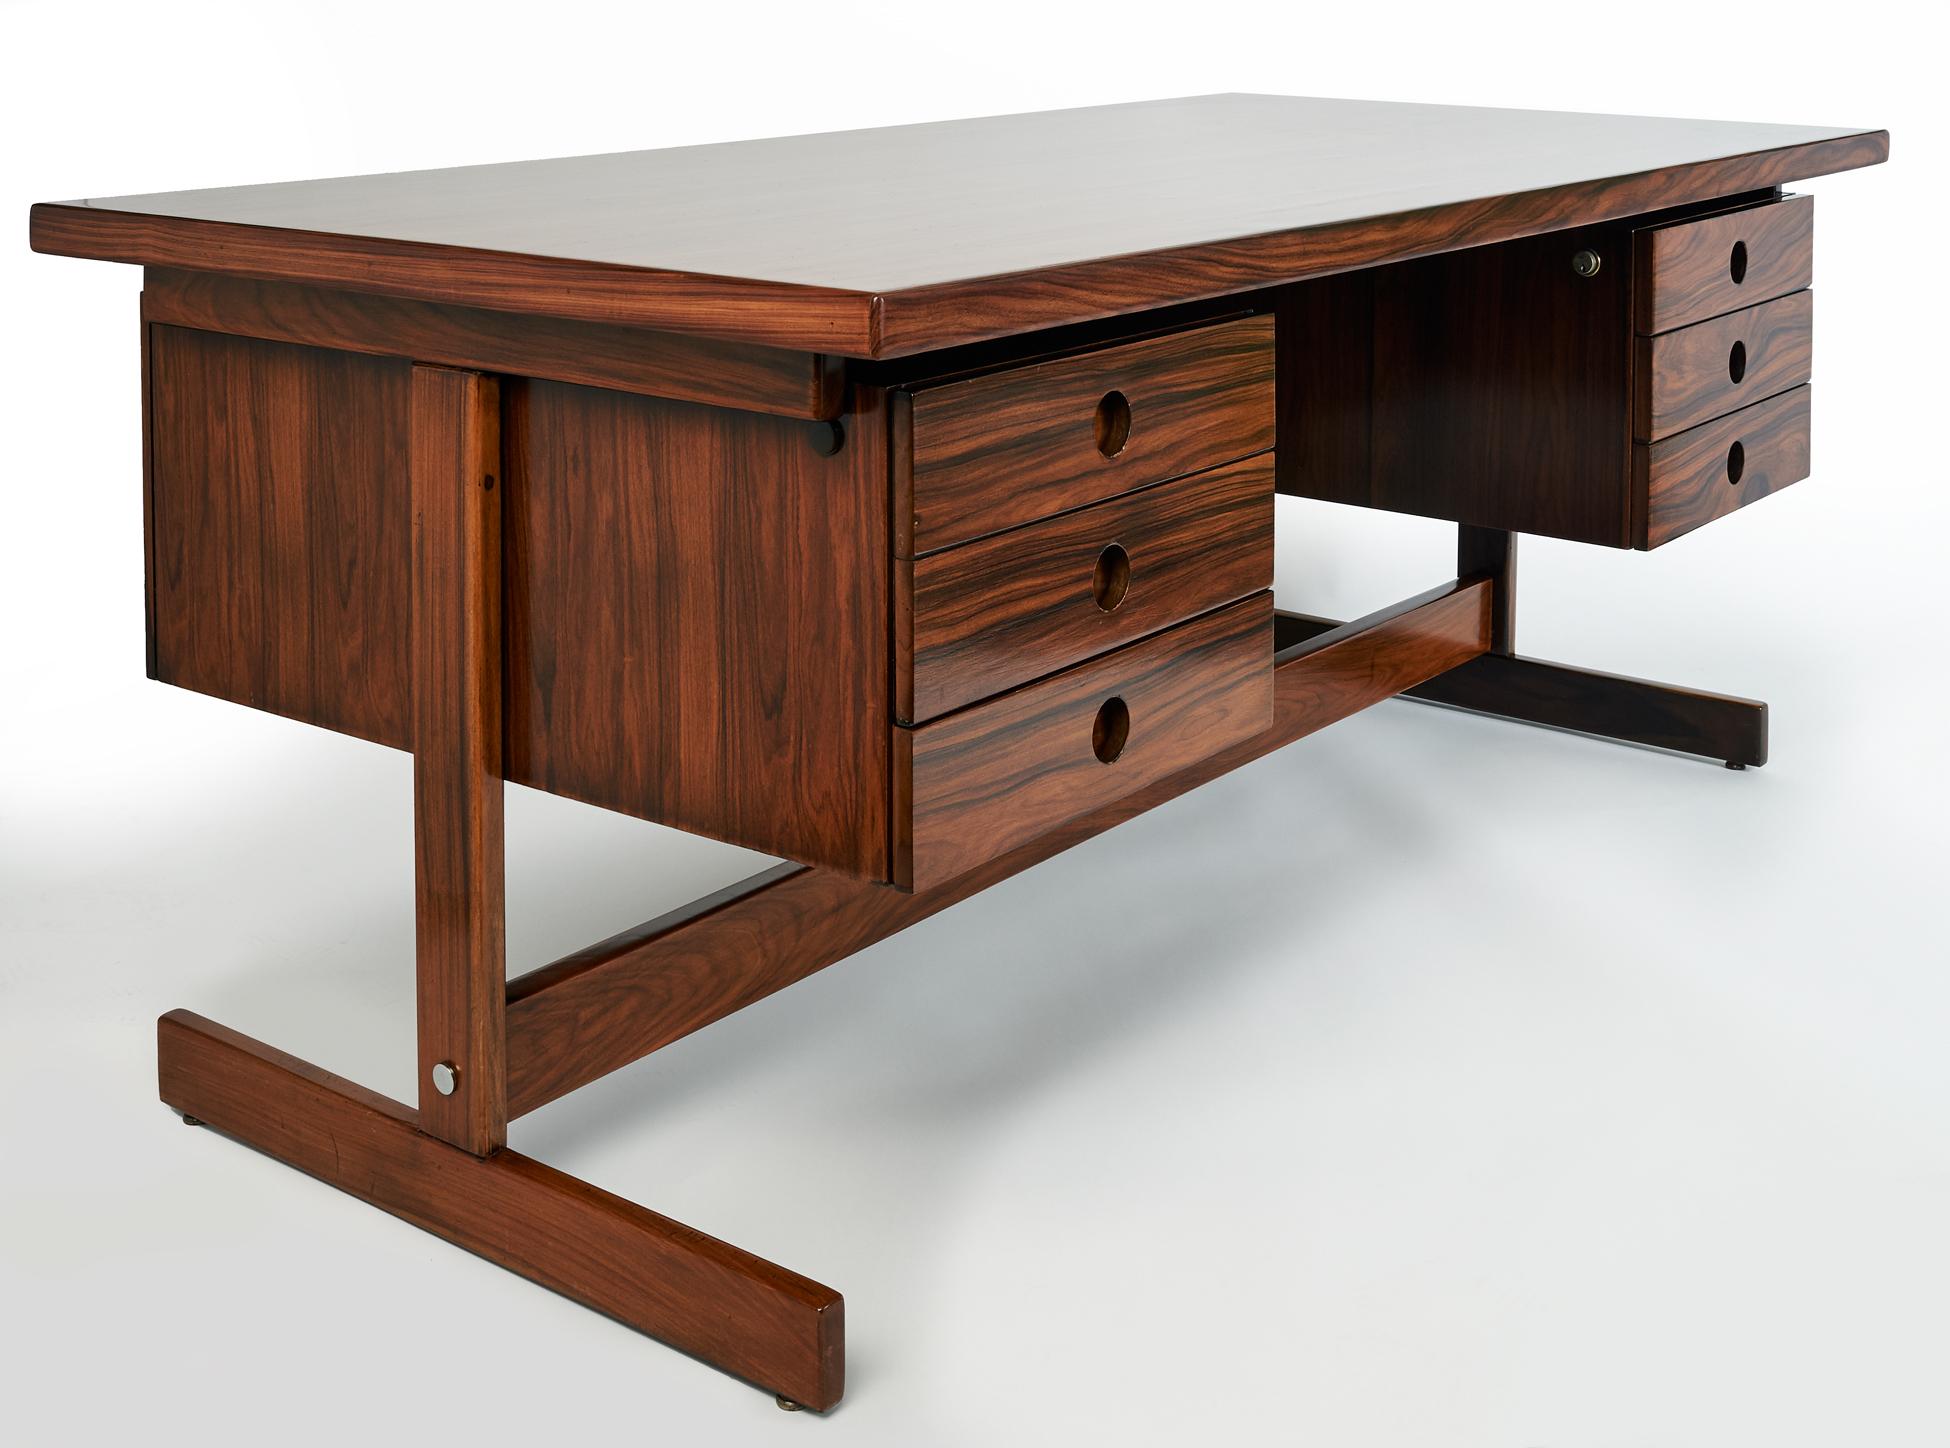 Sérgio Rodrigues (1927–2014)

An imposing and stately floating desk in sumptuous jacaranda wood with contrasting chrome-plated steel details by modern Brazilian design pioneer and frequent Oscar Niemeyer collaborator Sérgio Rodrigues. Dubbed the